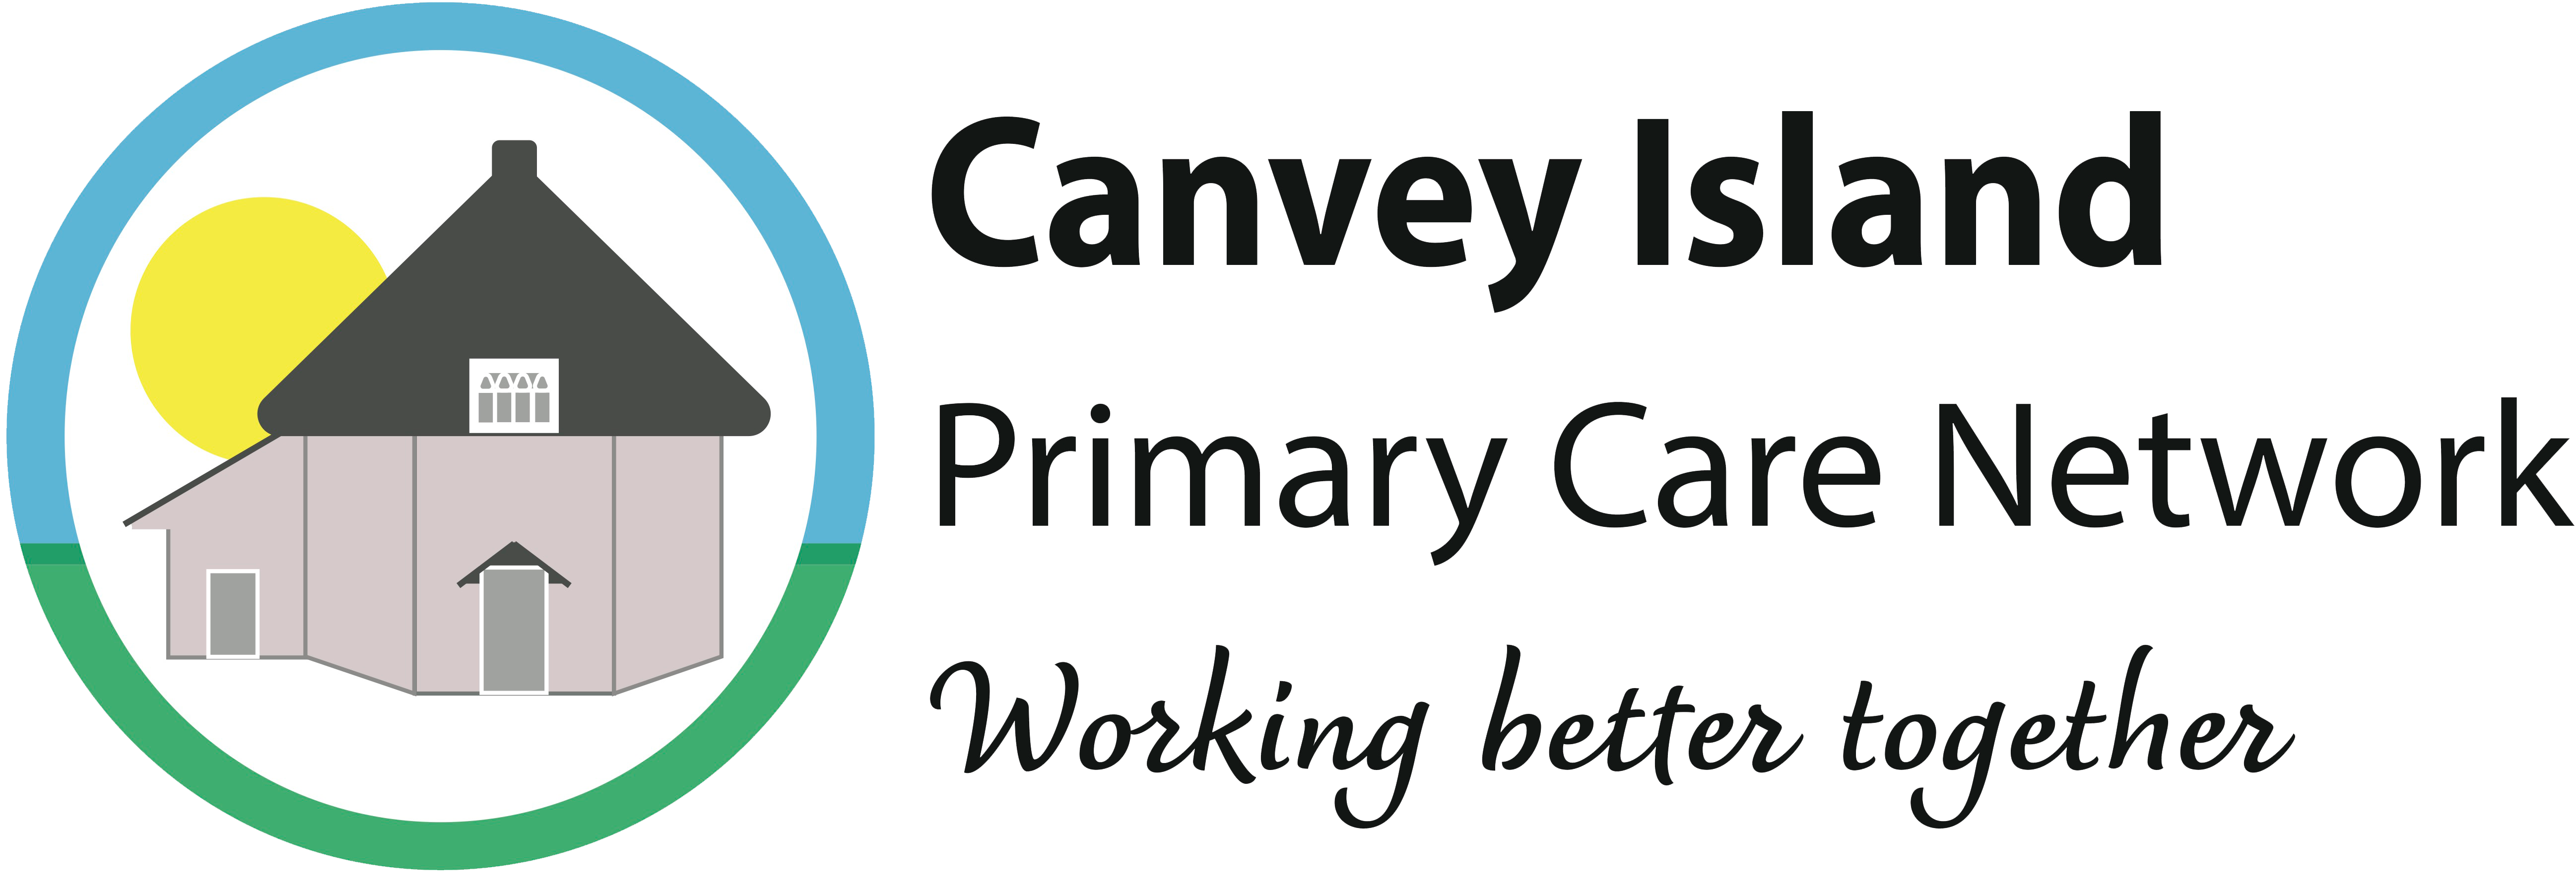 Canvey Primary Care Network logo